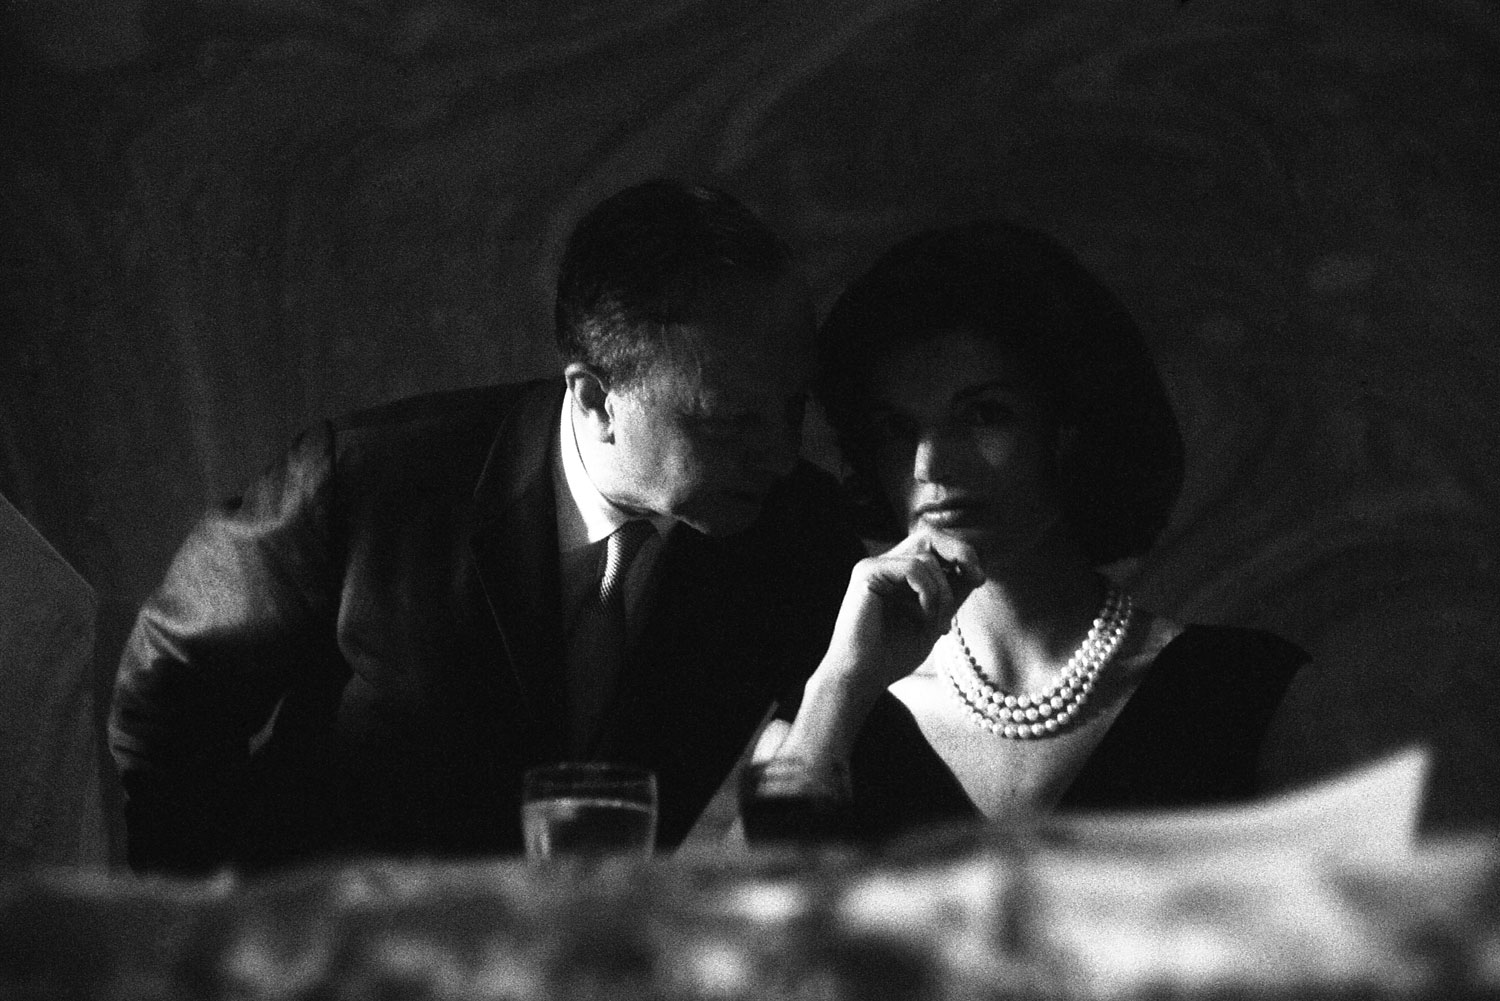 The mayor of New York City, Robert Wagner Jr., speaks to Jackie Kennedy during a campaign dinner in 1960.